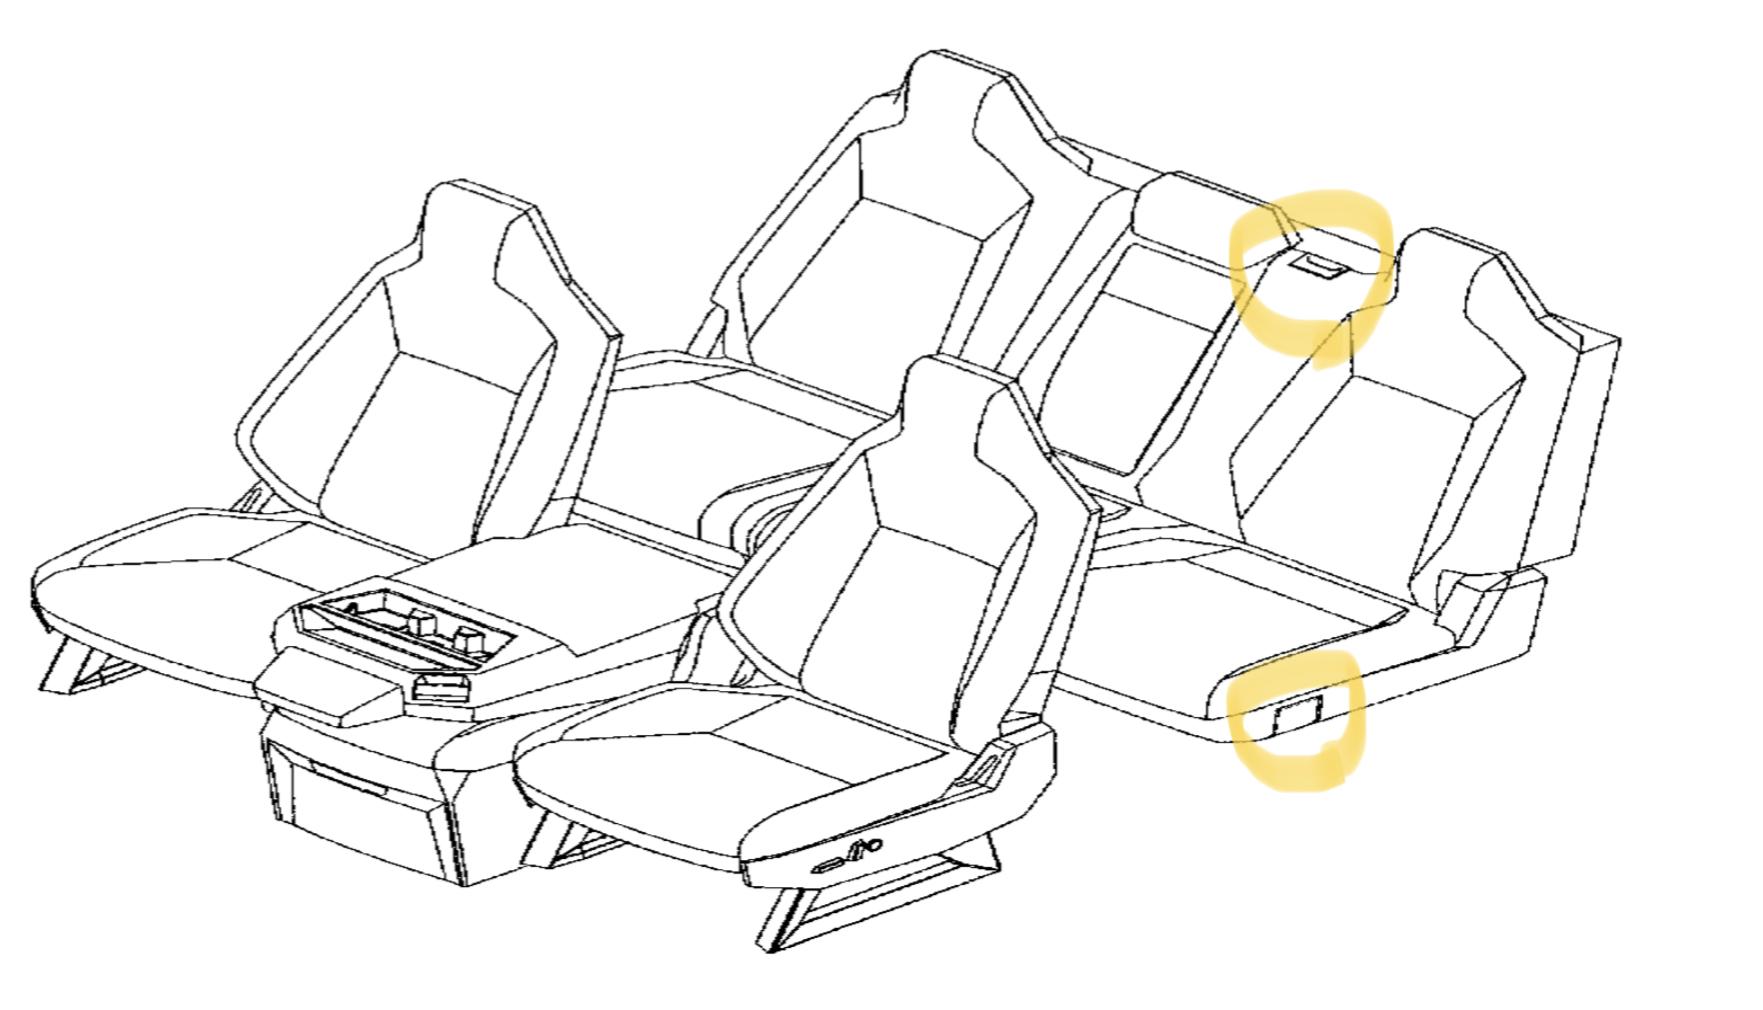 Tesla Cybertruck Folding rear seats (& center seat) confirmed in new Cybertruck patent! Points to possible pass through? A6C610AF-3B77-46F4-B994-59805FB59B1E